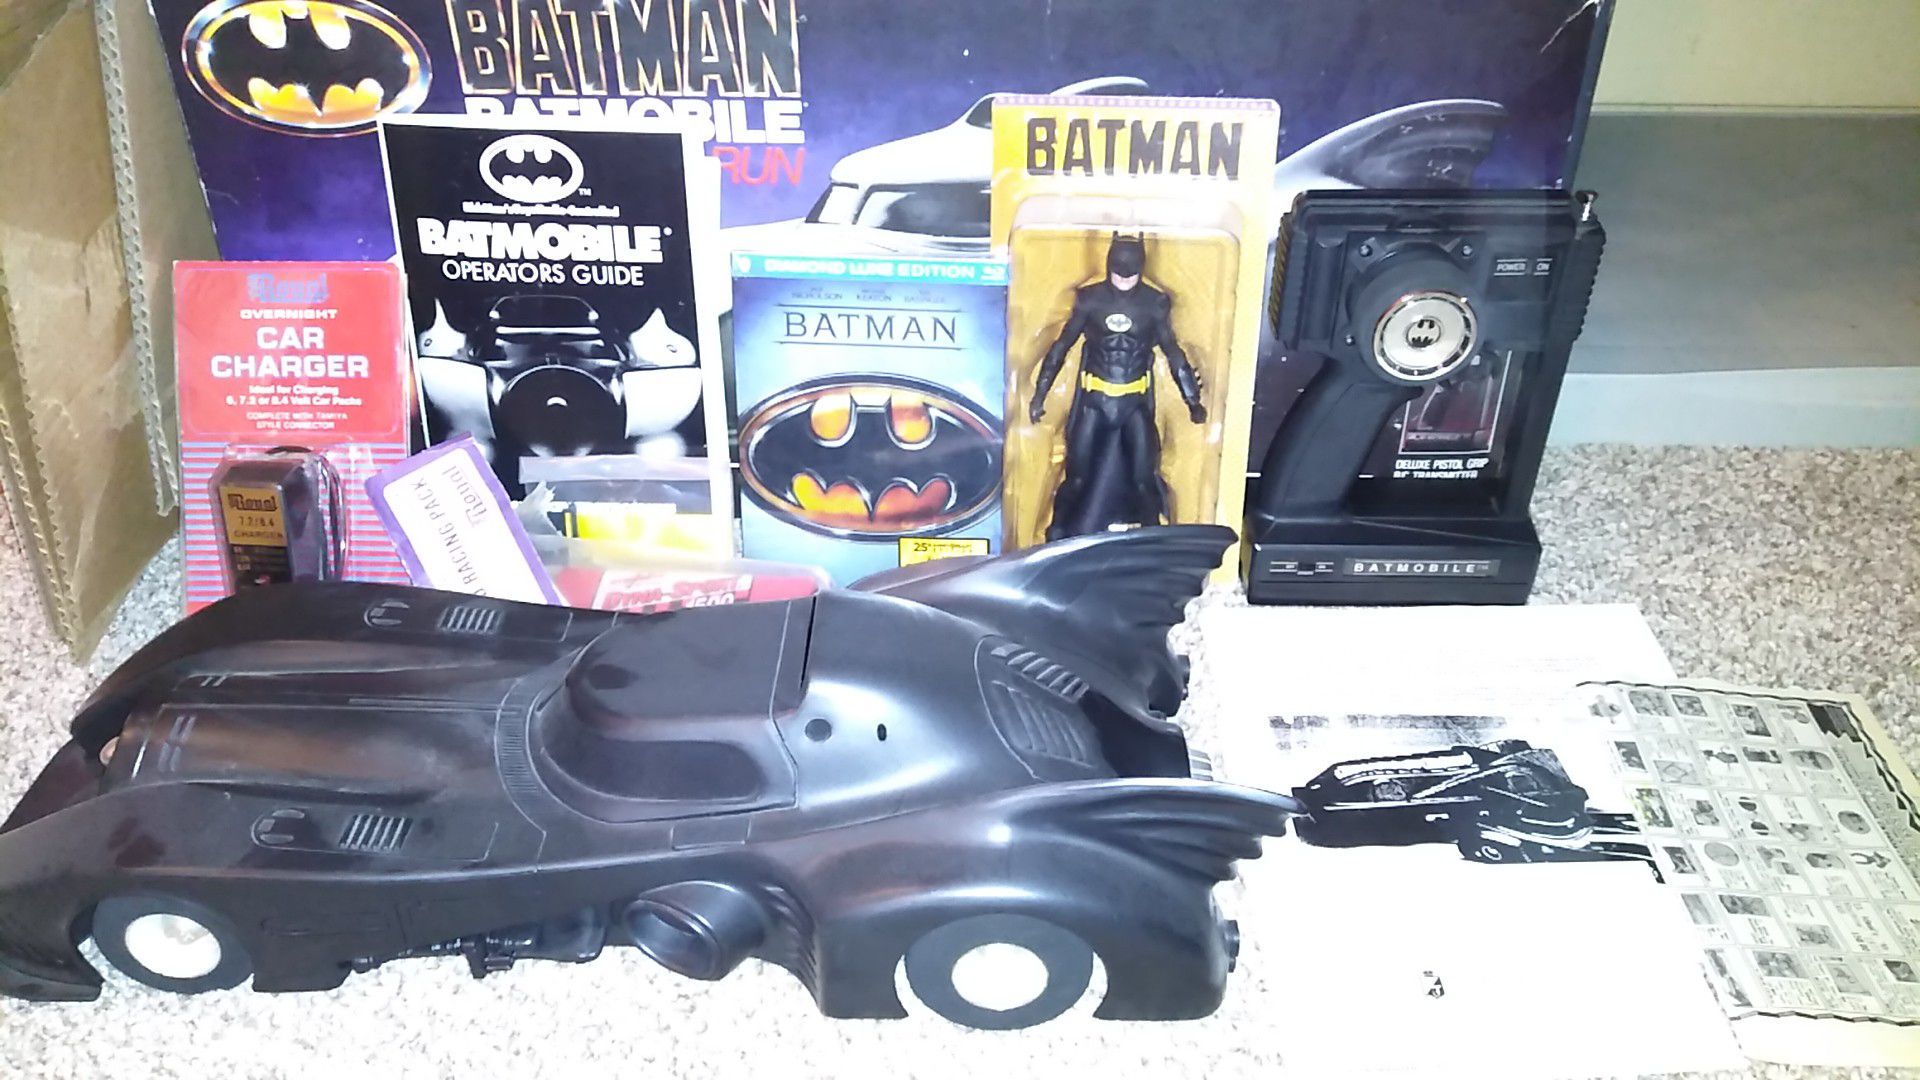 1989 Batman NECA TRU exclusive action figure with Alfred and 1990 Richman Batmobile RC car and Diamond Luxe Edition Blu-ray movie FAST SHIPPING